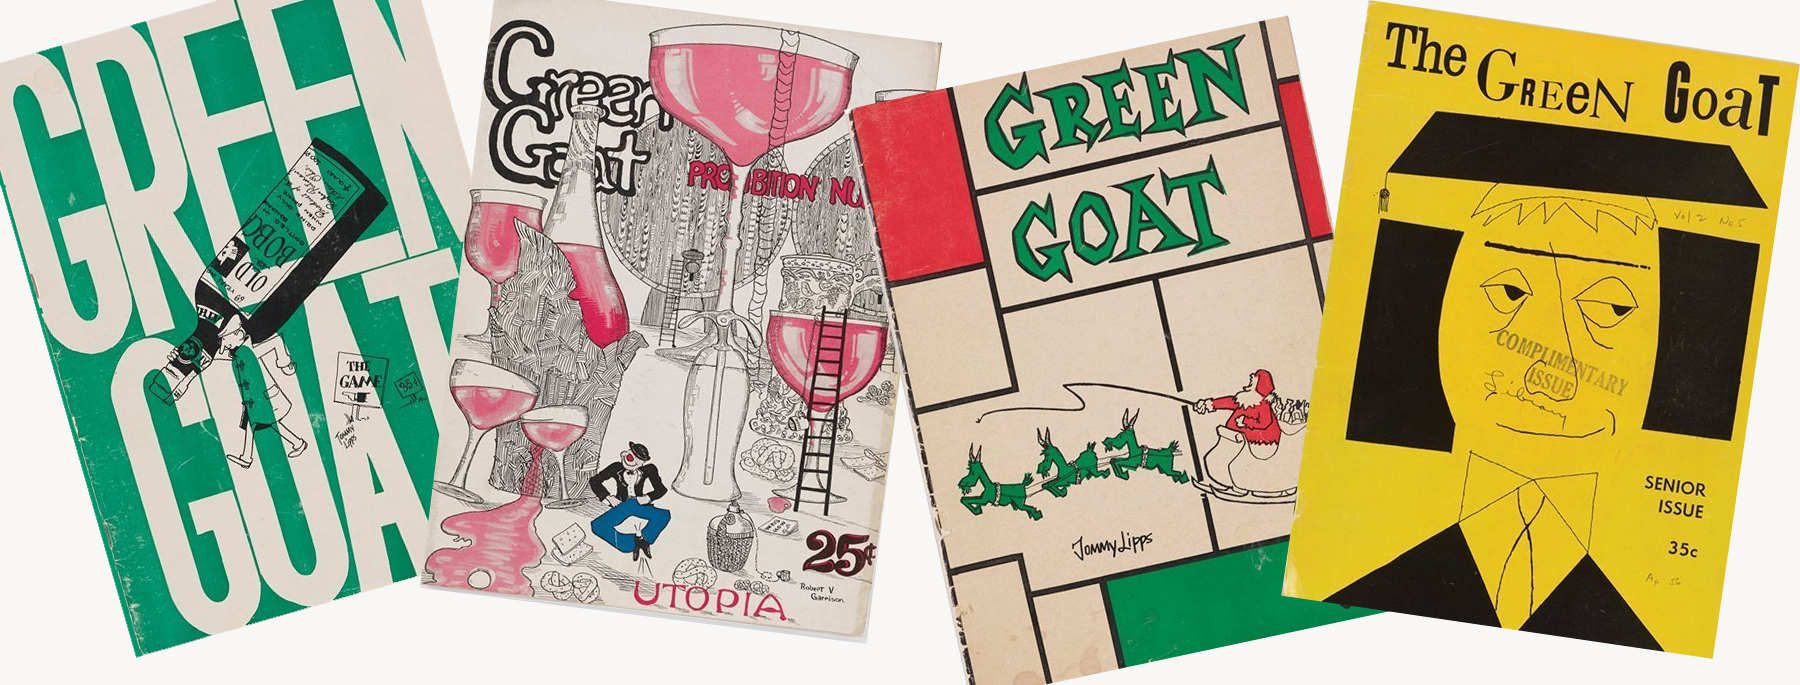 4 old issues of the Green Goat magazine